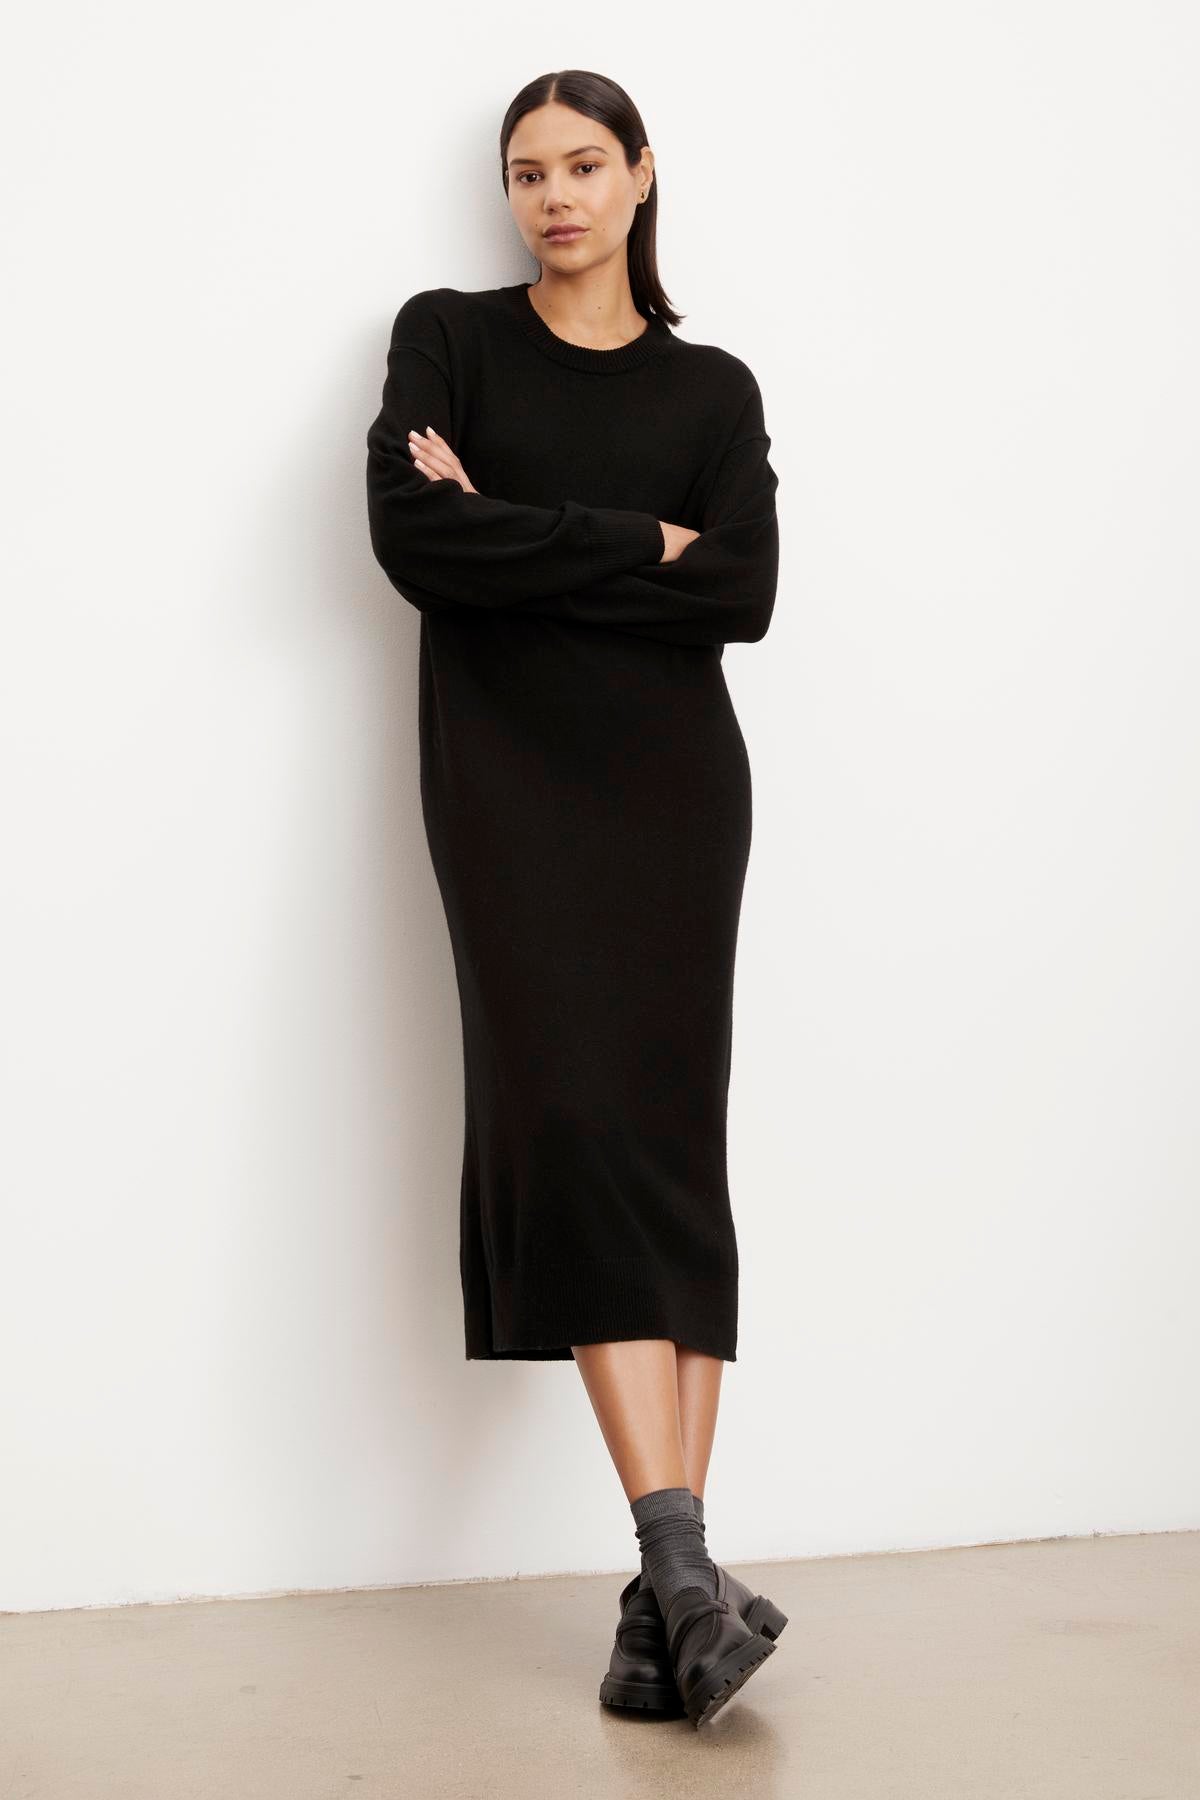 A woman in a black long-sleeve KADEN SWEATER DRESS by Velvet by Graham & Spencer with a crew neckline and boots, standing against a white background with arms crossed.-35654462603457